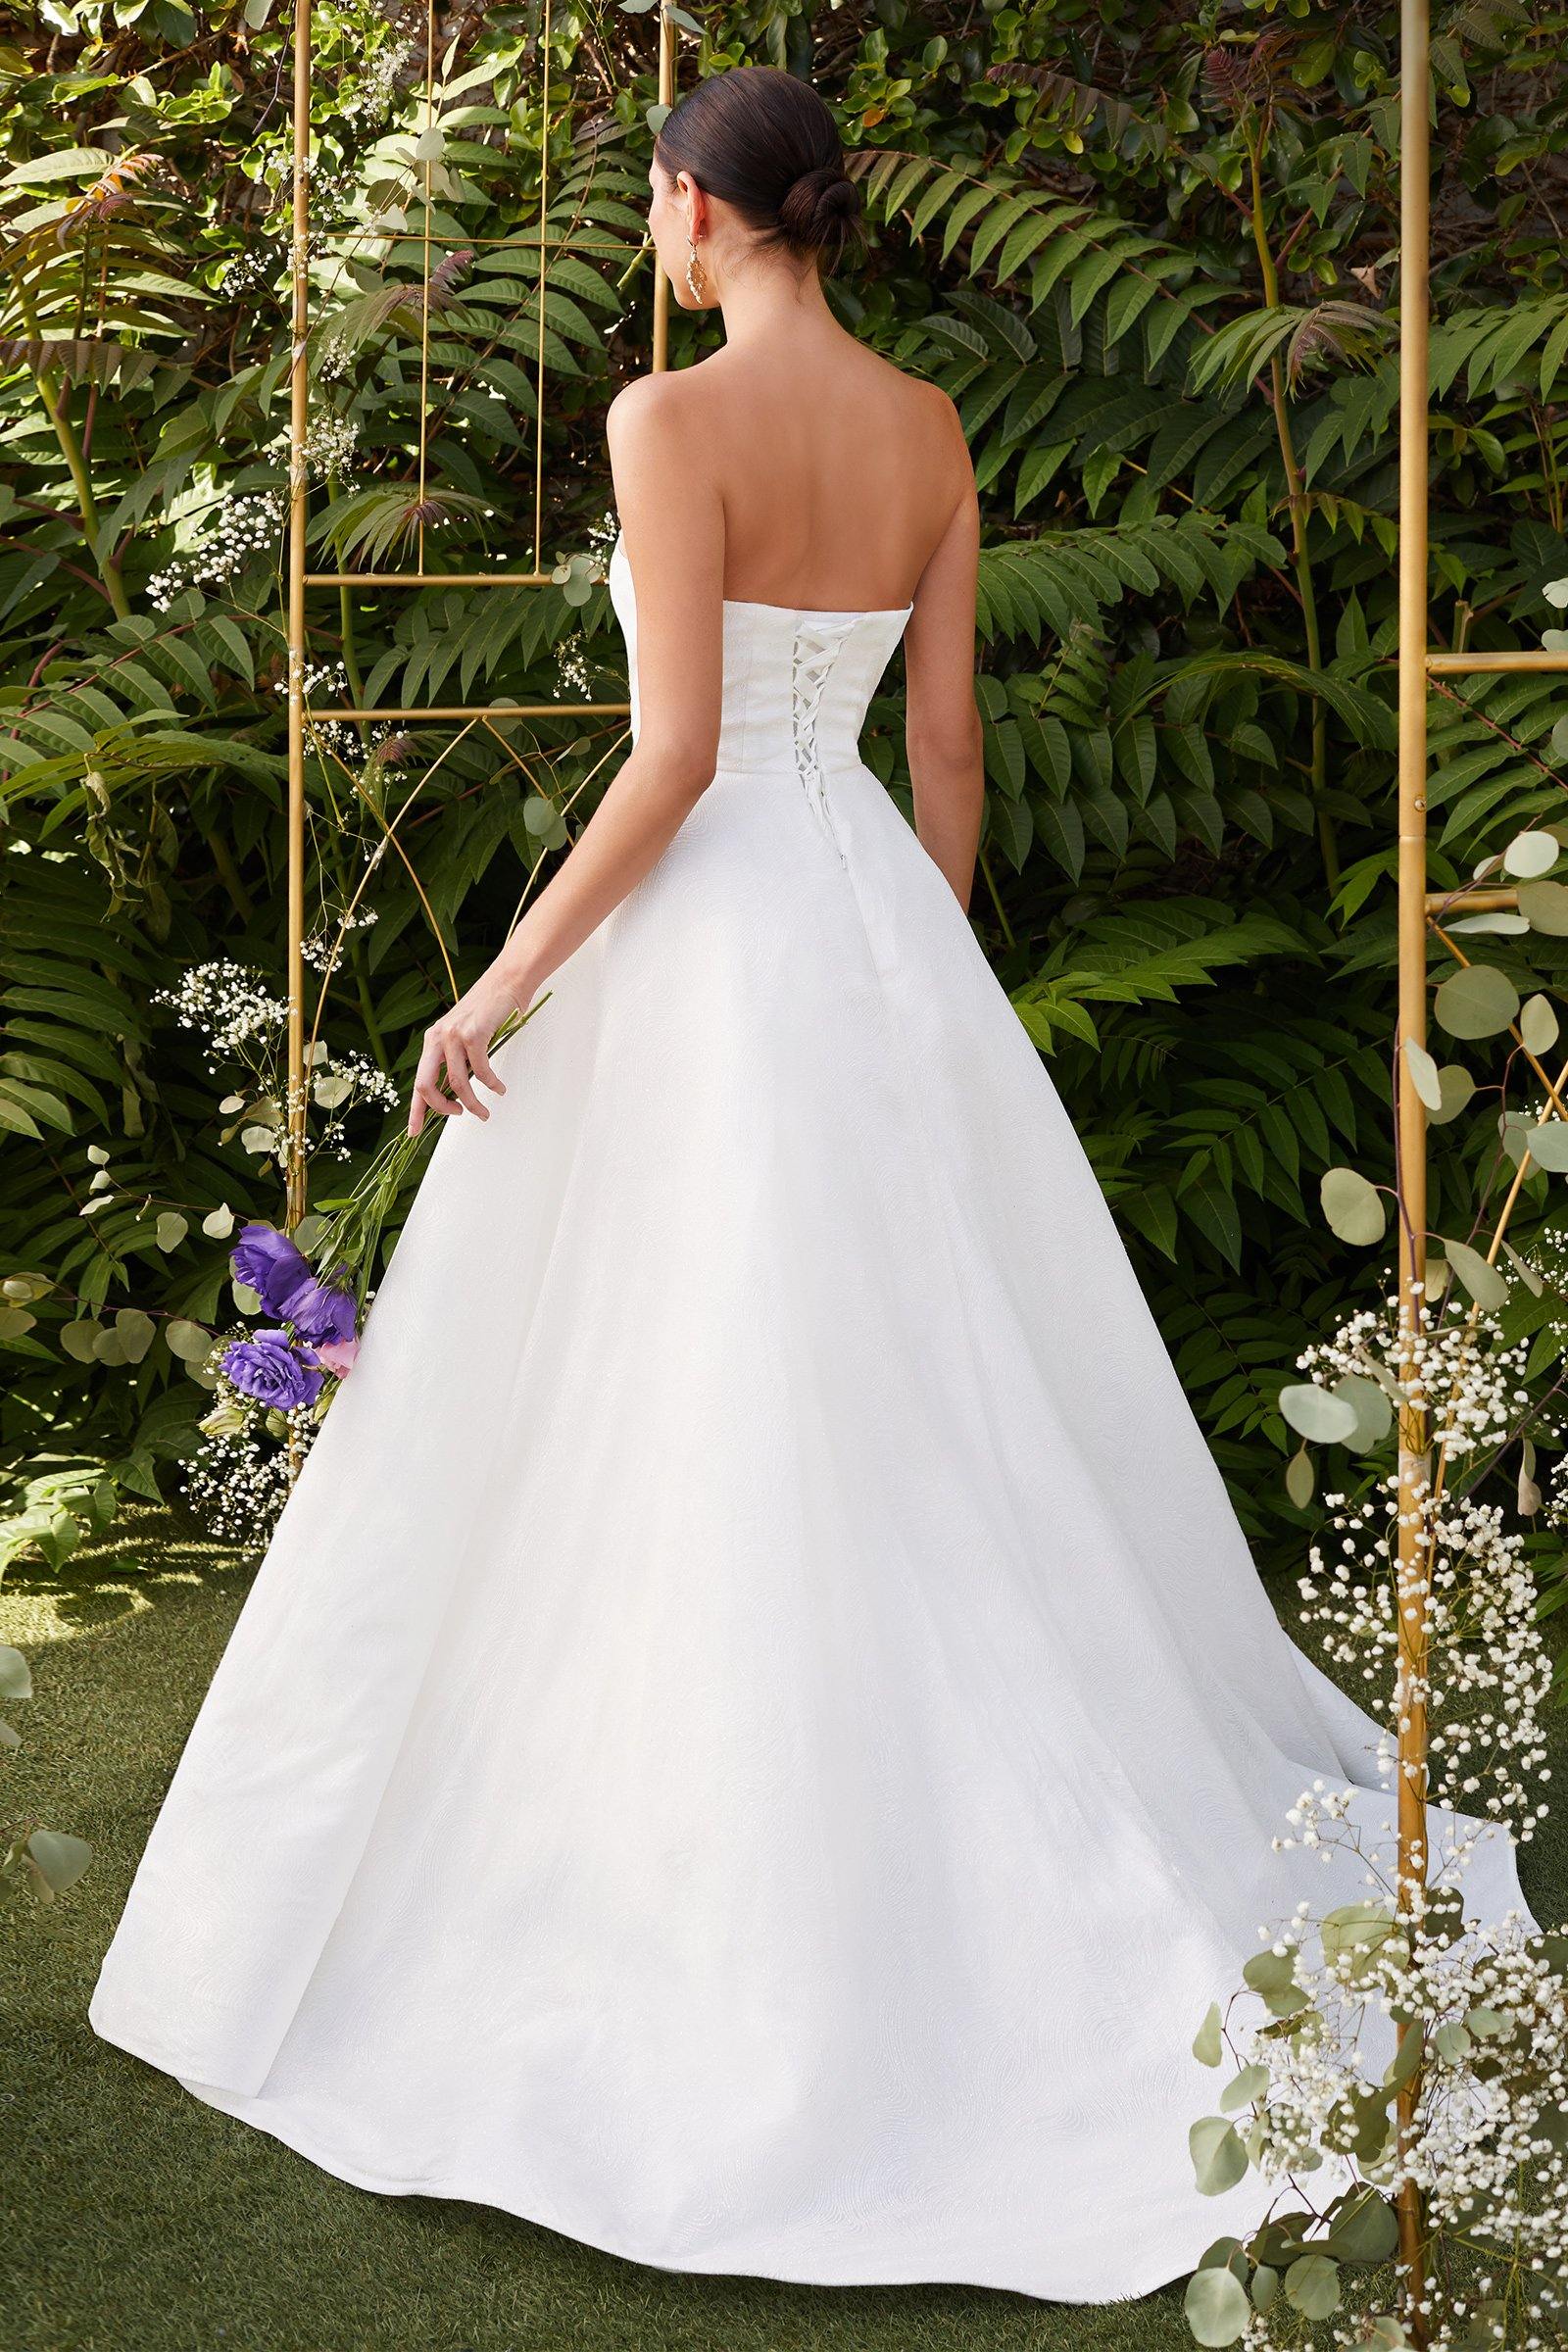 Long Bridal Gown Wedding Dress - The Dress Outlet